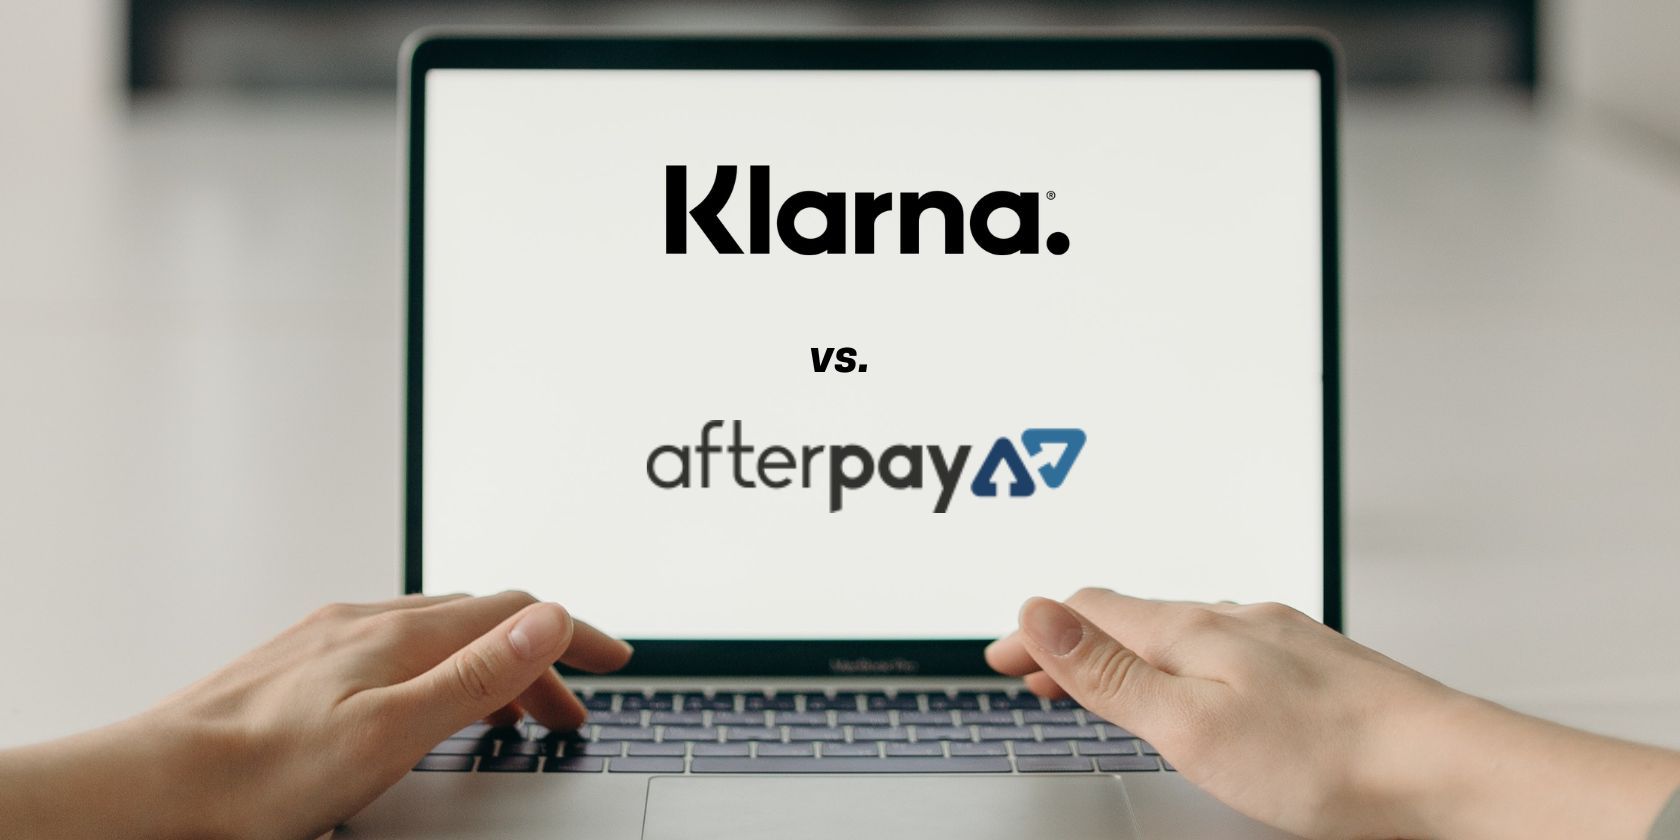 klarna and afterpay logos on laptop screen being used by person